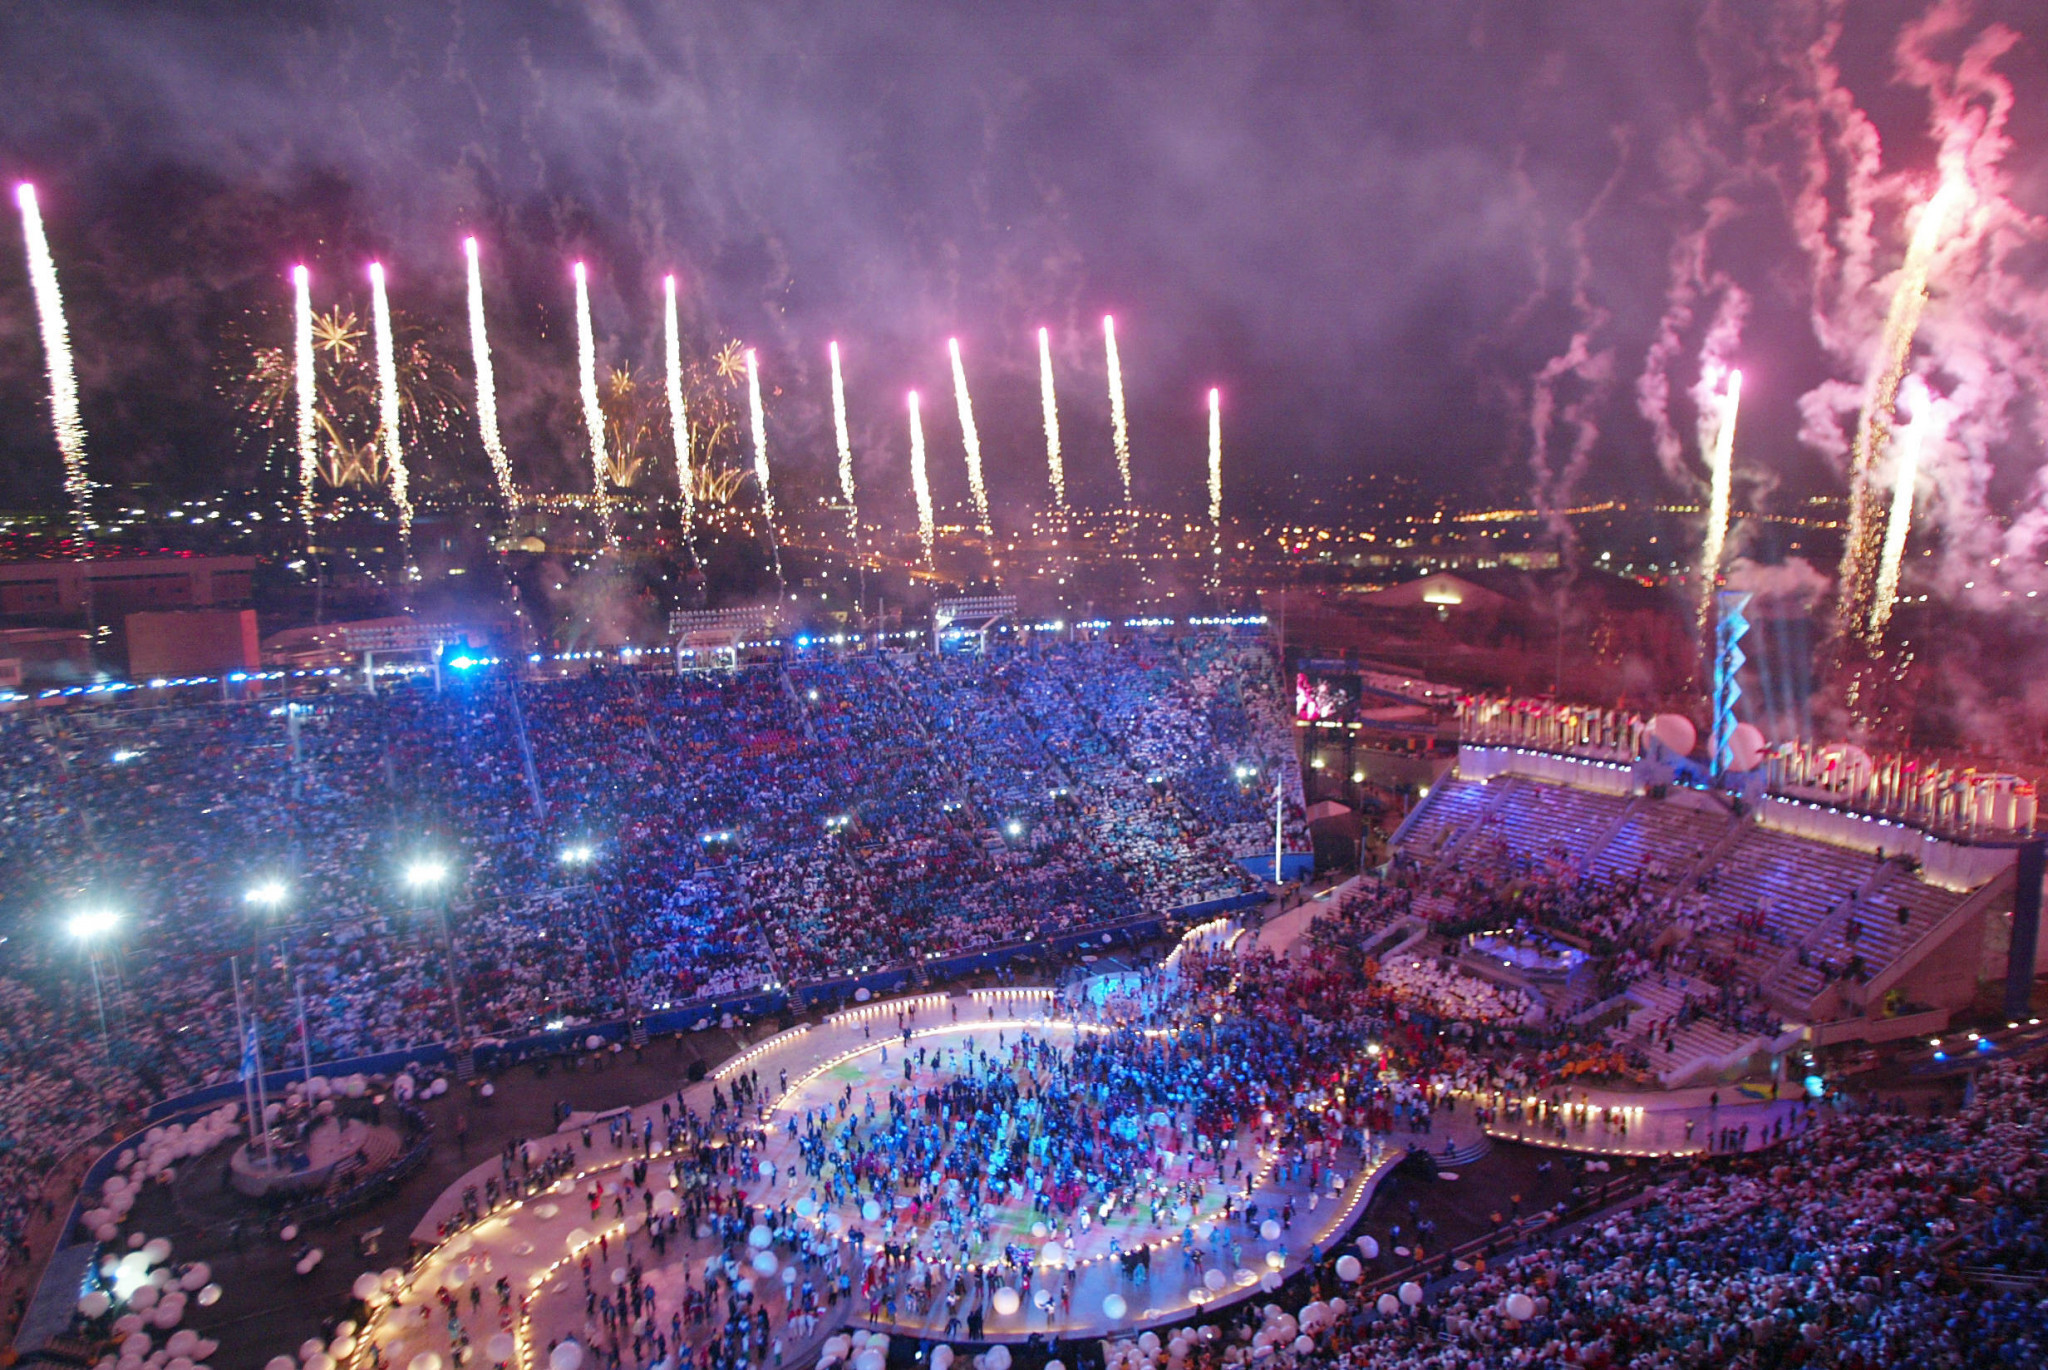 IOC enters into continuous dialogue with Salt Lake City about hosting Winter Olympic Games